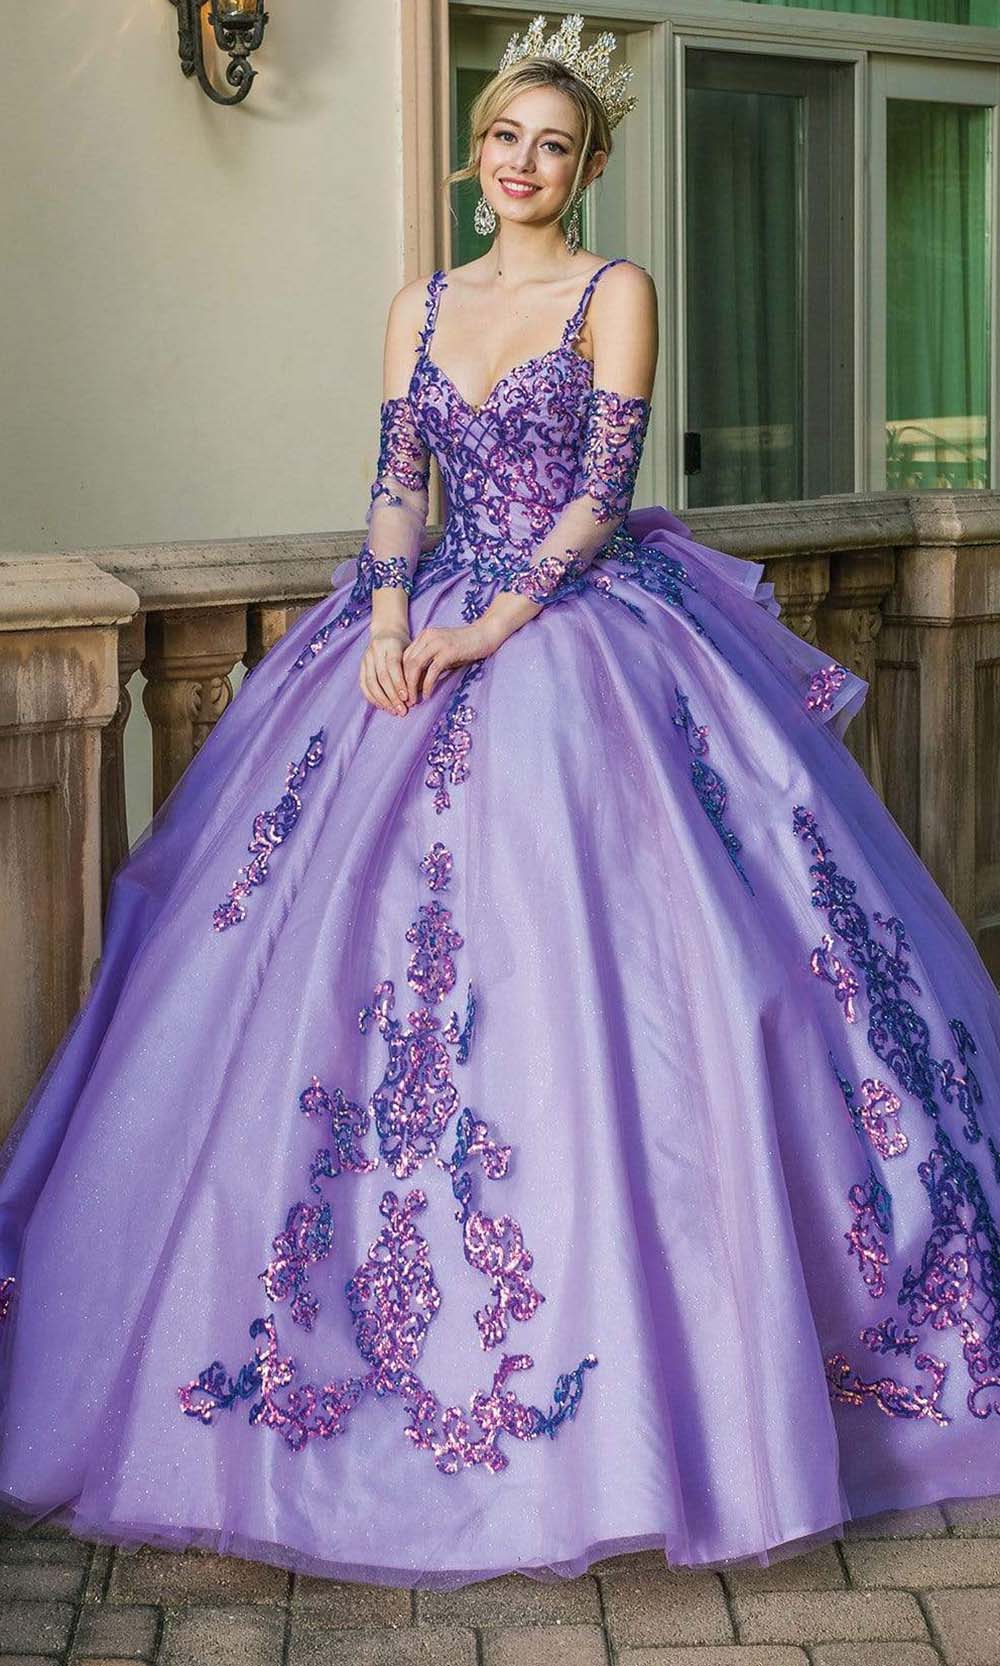 Image of Dancing Queen - 1652 Shimmer Applique Ballgown with Bow Accent